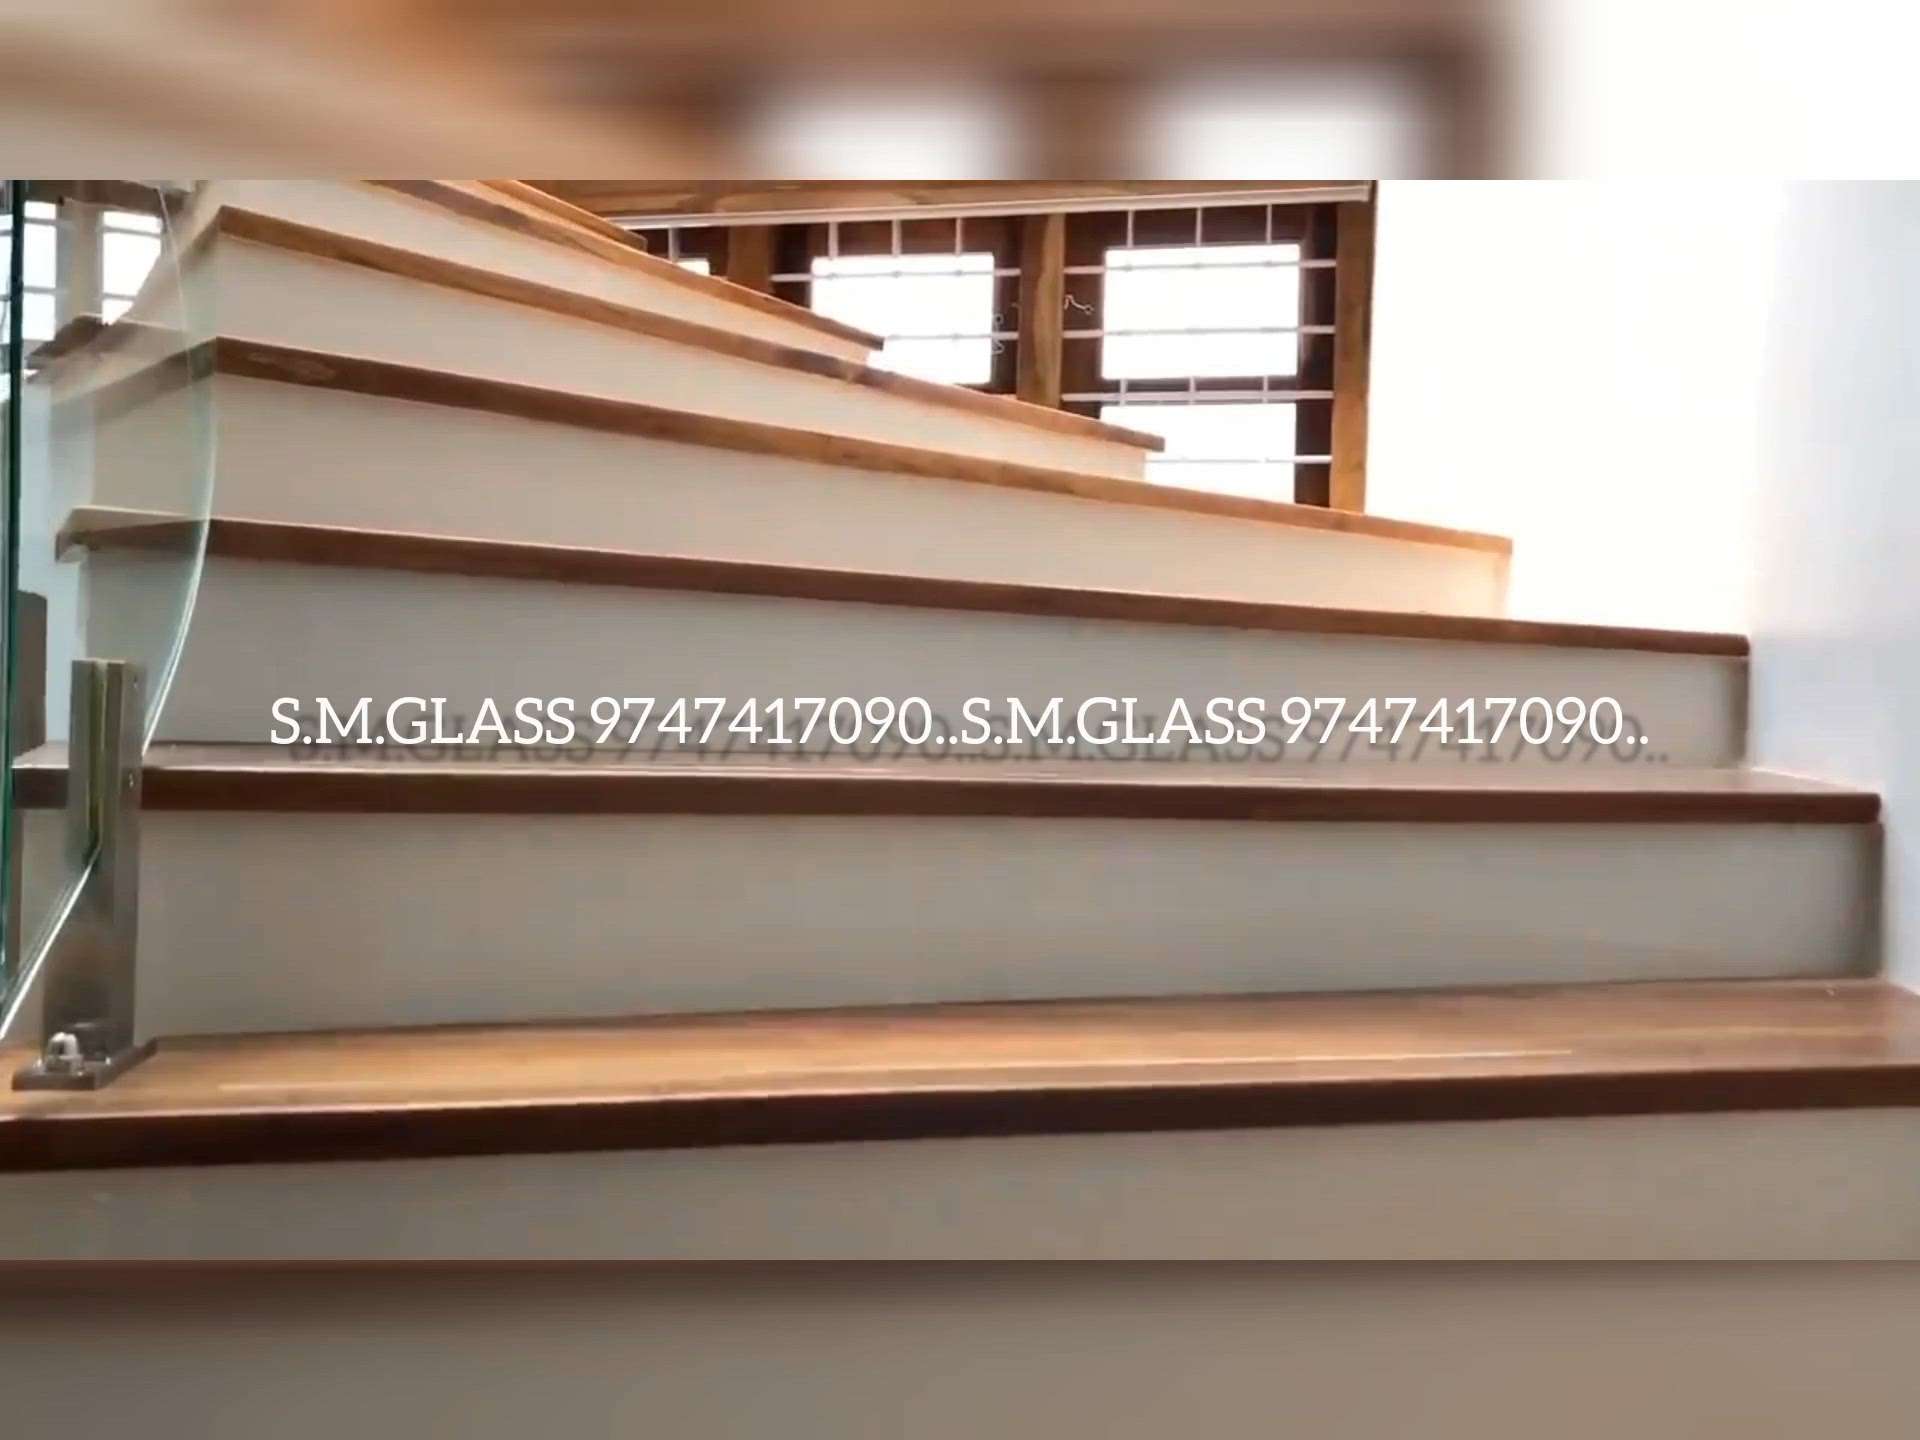 #GlassHandRailStaircase 
#CurvedStaircase 
#curved_glass_work 
#curved_glass_railing 
#woodandglasshandrail 
#spiralstaircase 
#WoodenStaircase 
#LUXURY_INTERIOR